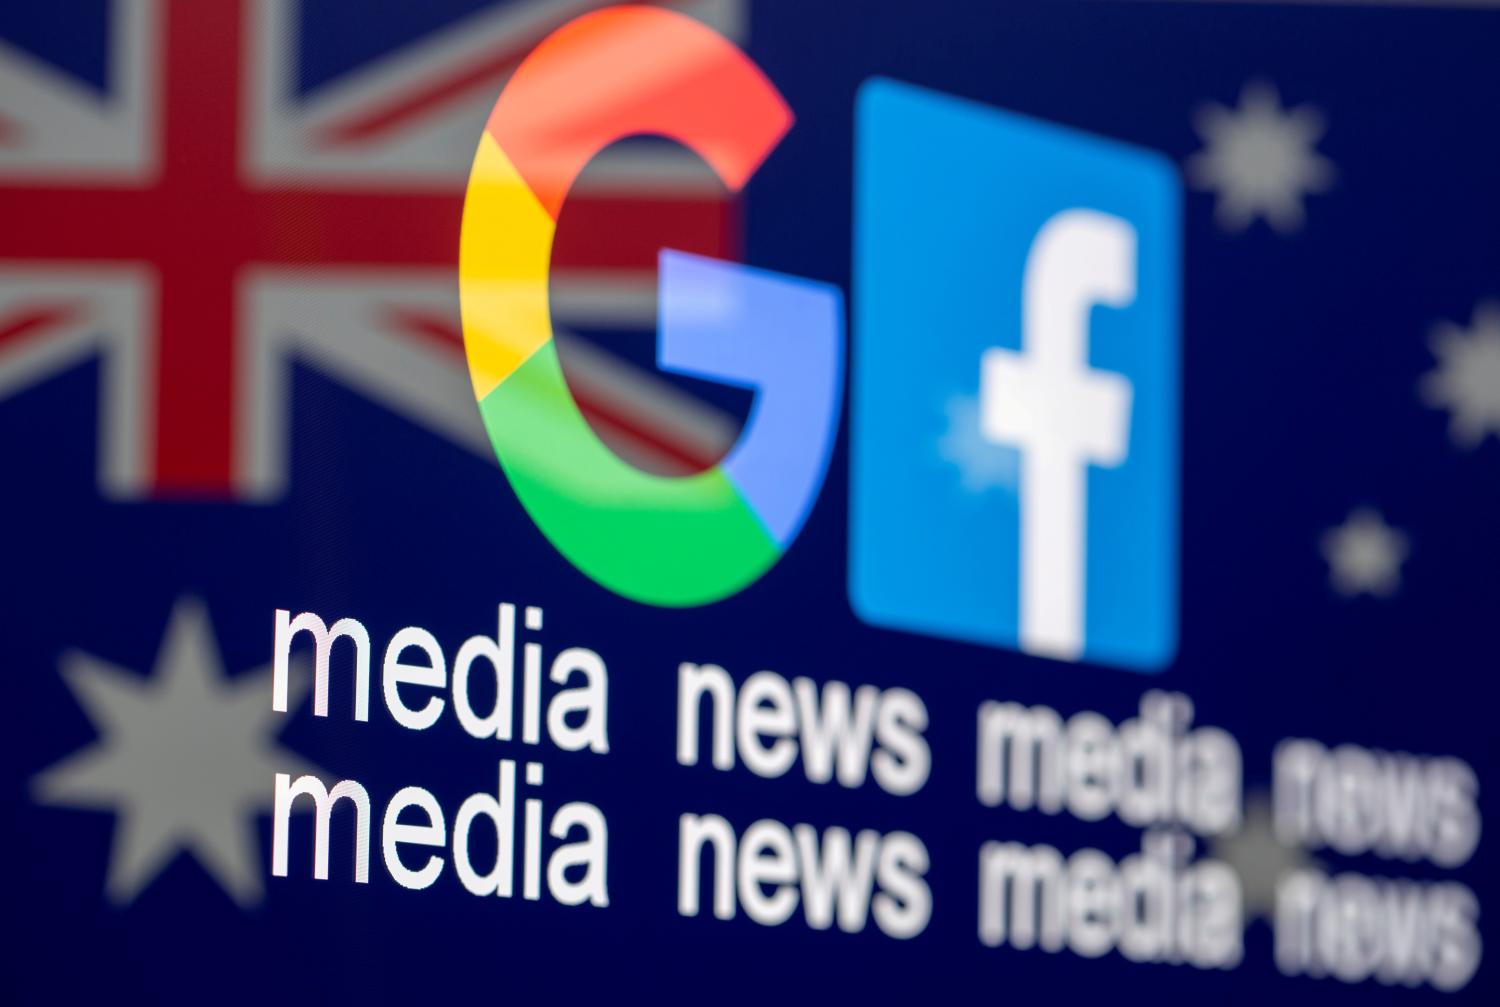 The Google and Facebook logos are displayed over the flag of Australia along with the words "media news."